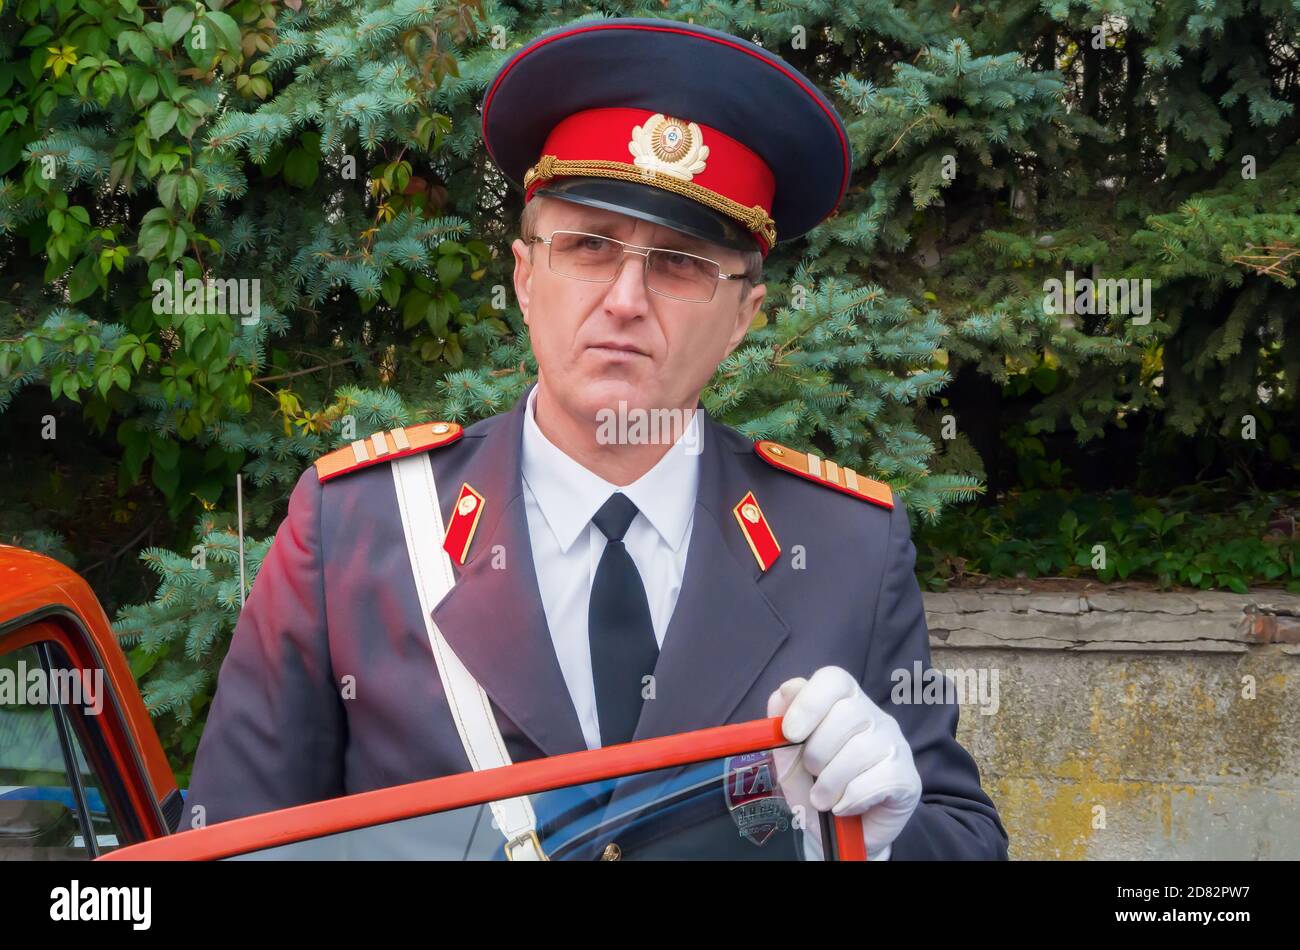 Dnipro, Ukraine - October 05, 2013: Man in retro uniform of Soviet police officer with the rank of sergeant Stock Photo